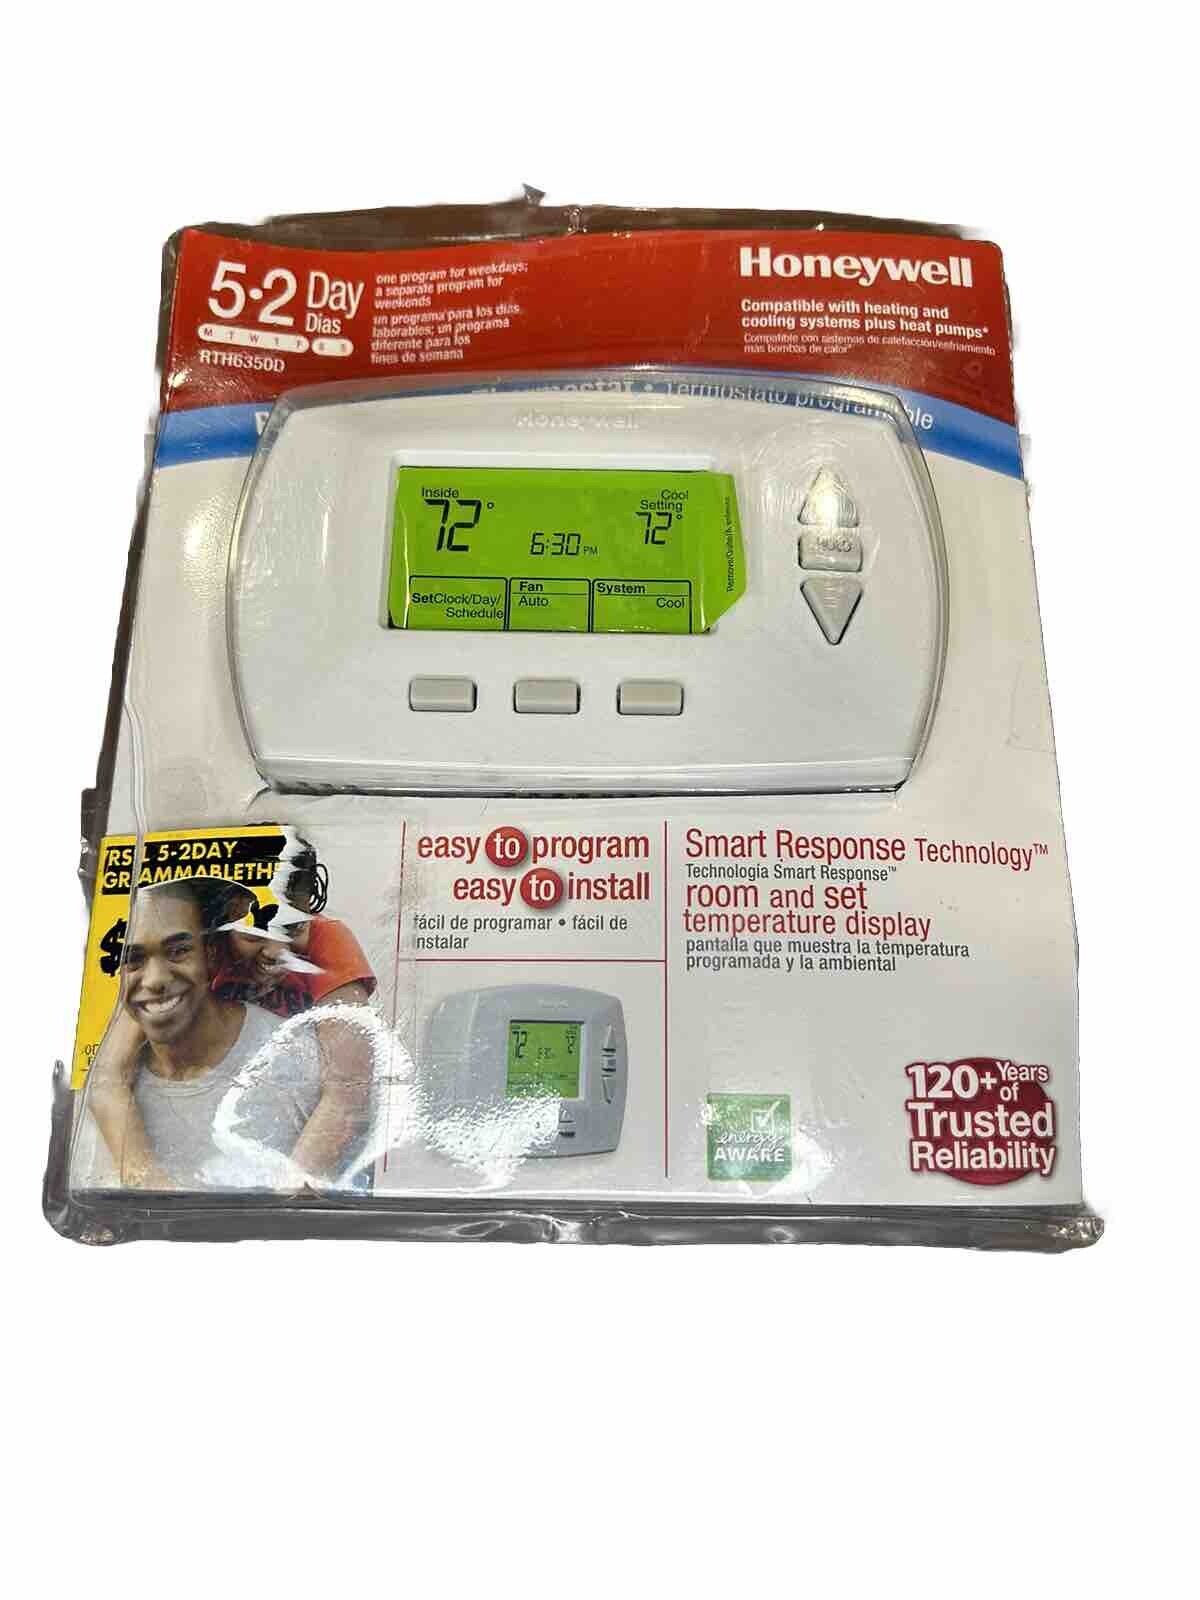 Honeywell 5-2 Day Programmable Thermostat (RTH6350D) Open Box White